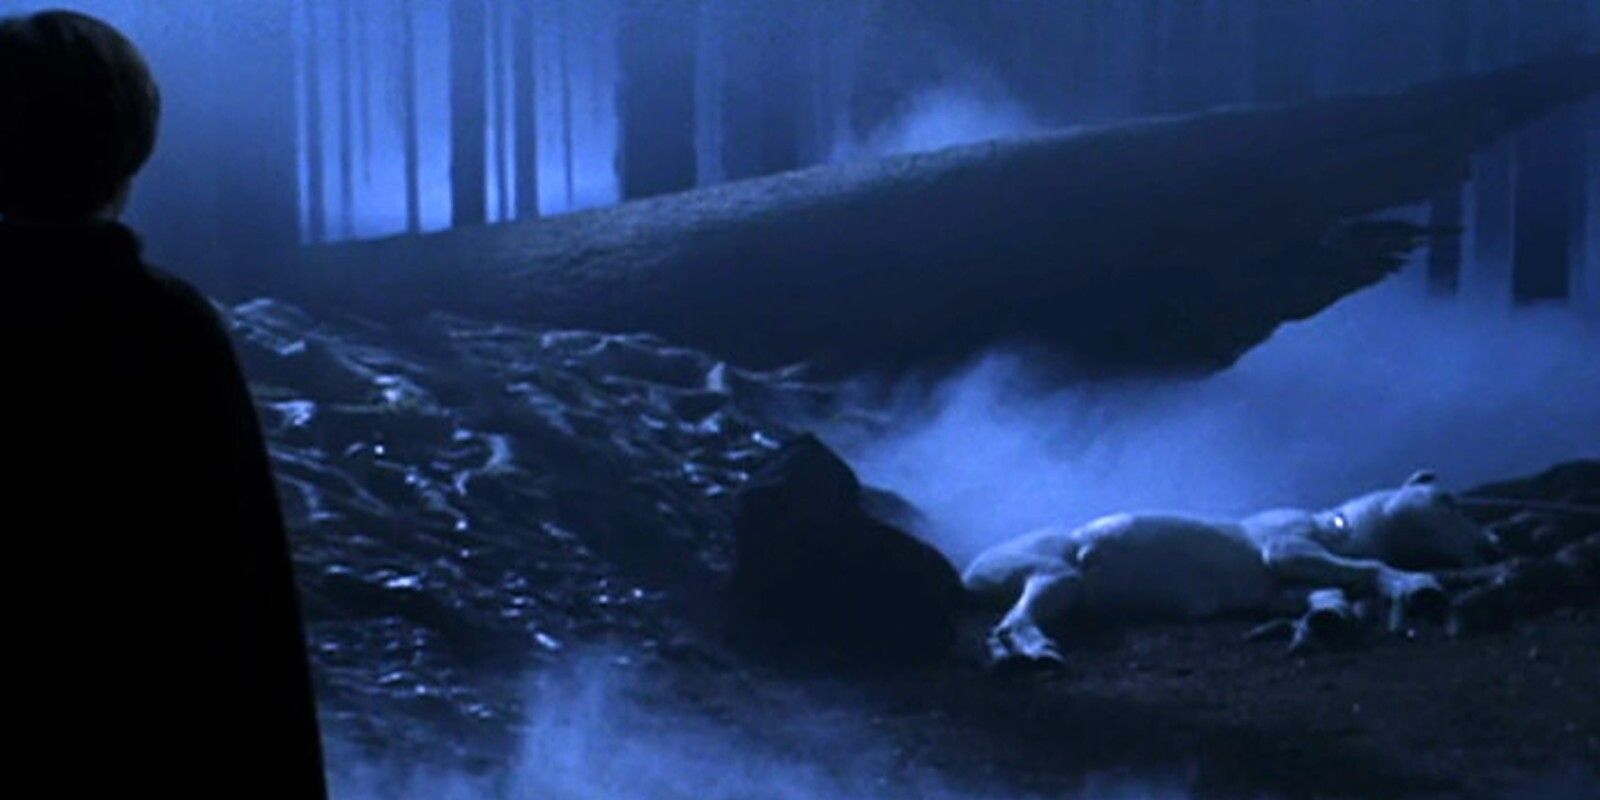 Harry looks at the dead unicorn in Philosopher's Stone